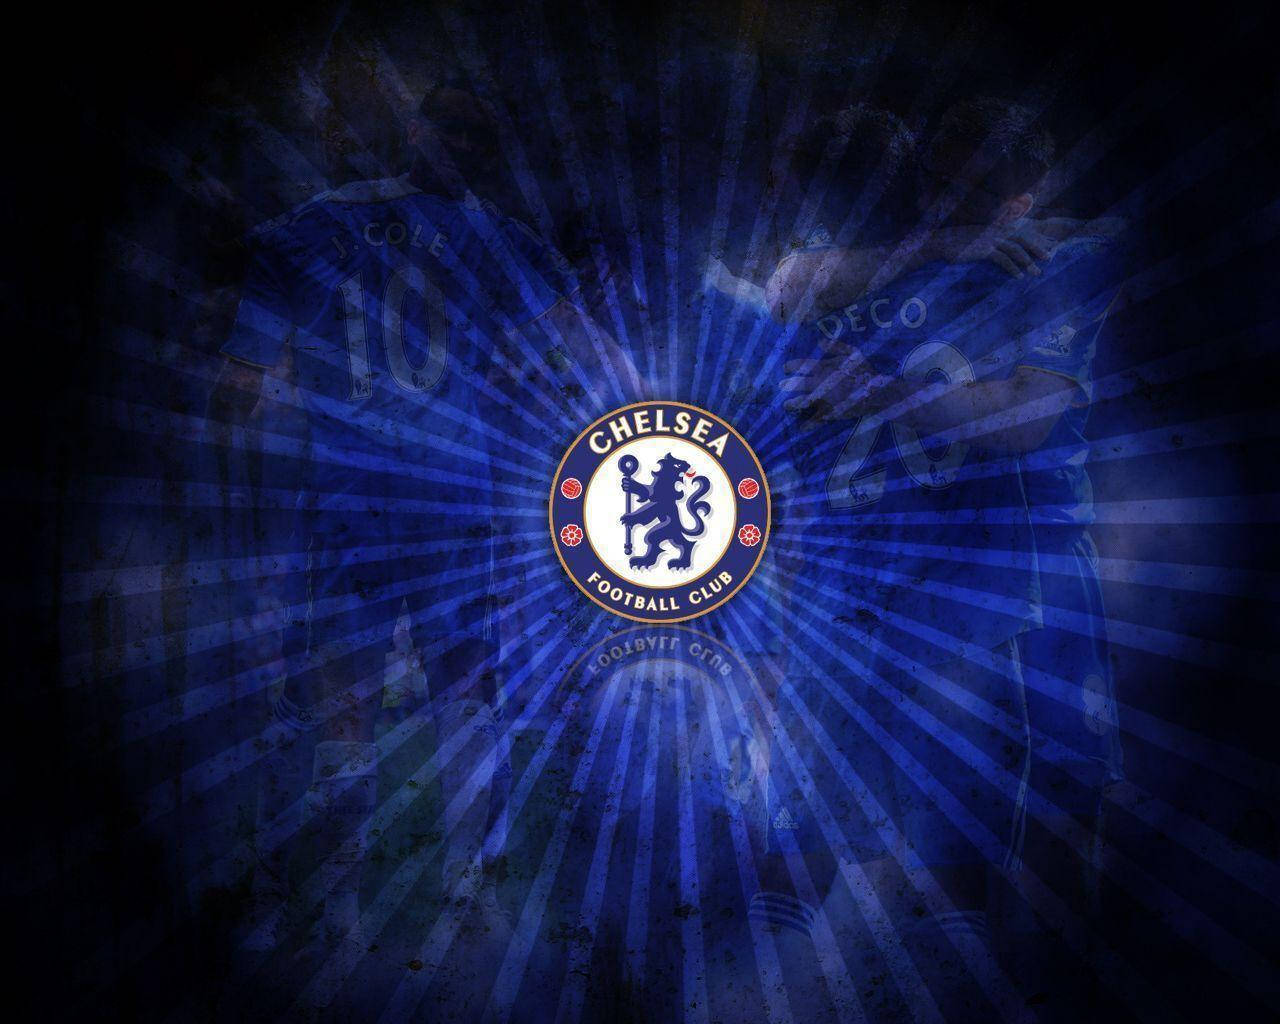 Chelsea Fc Badge With Blue Rays Wallpaper